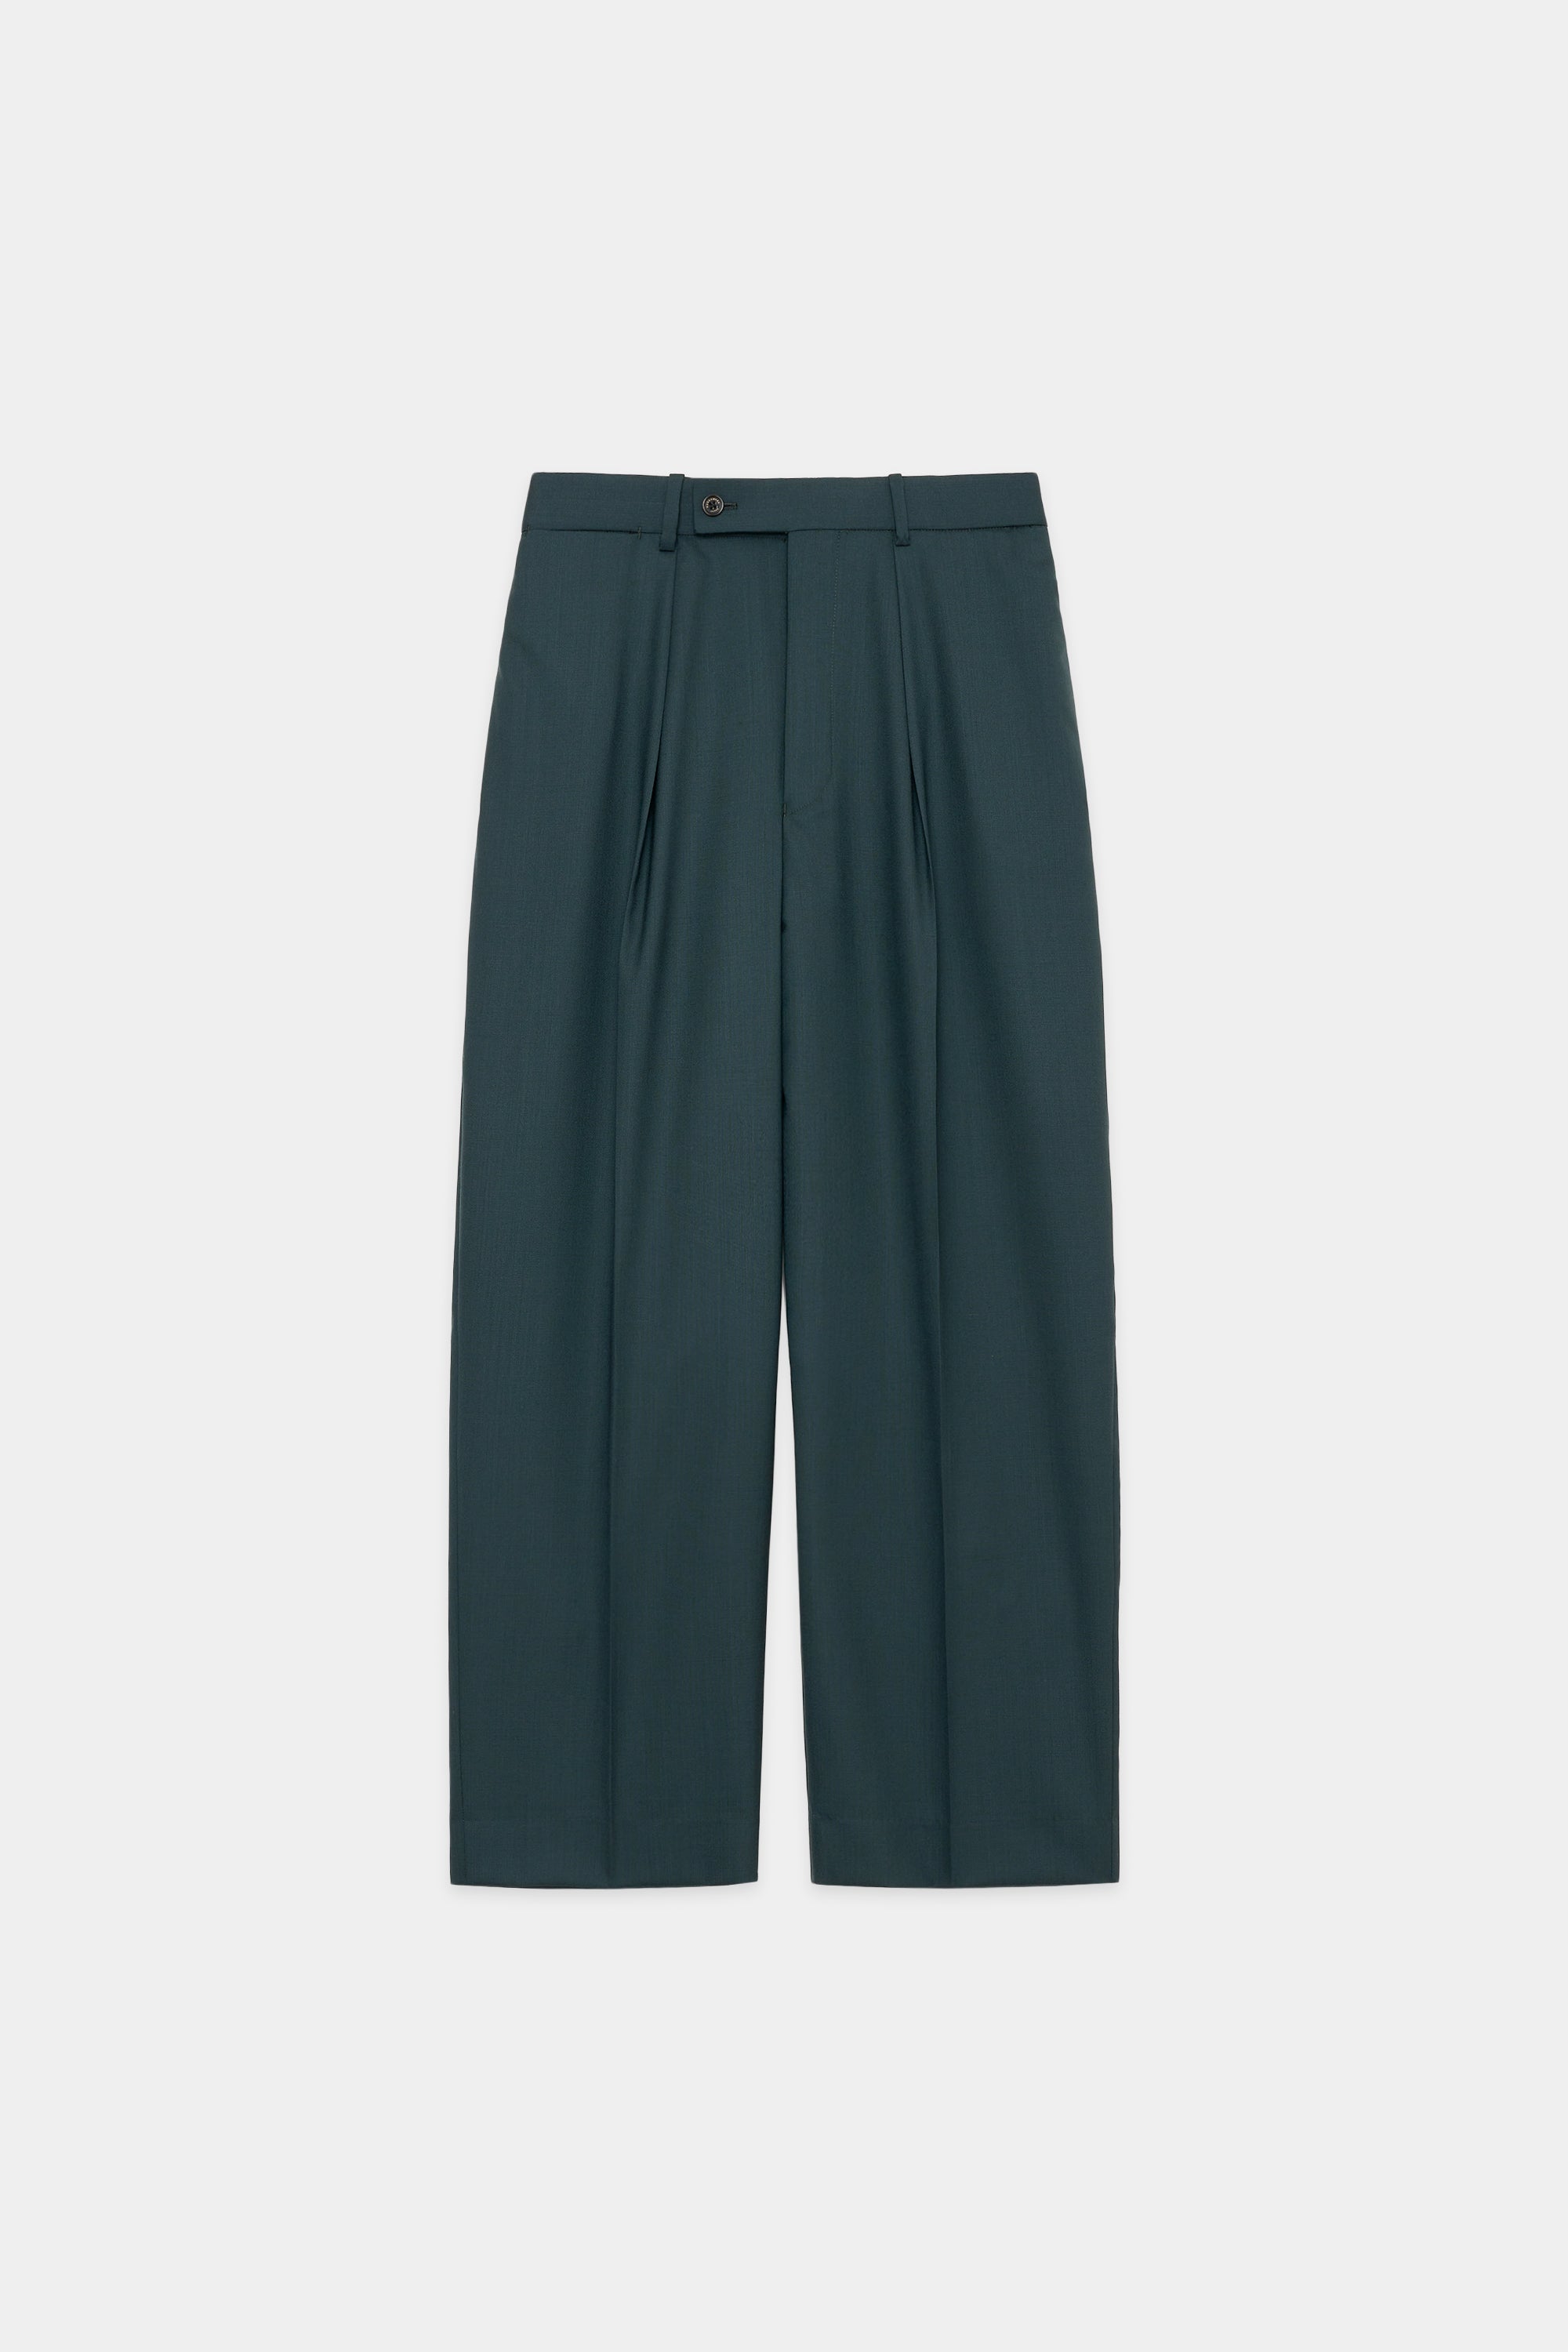 Organic Wool Tropical Classic Fit Trousers, Green